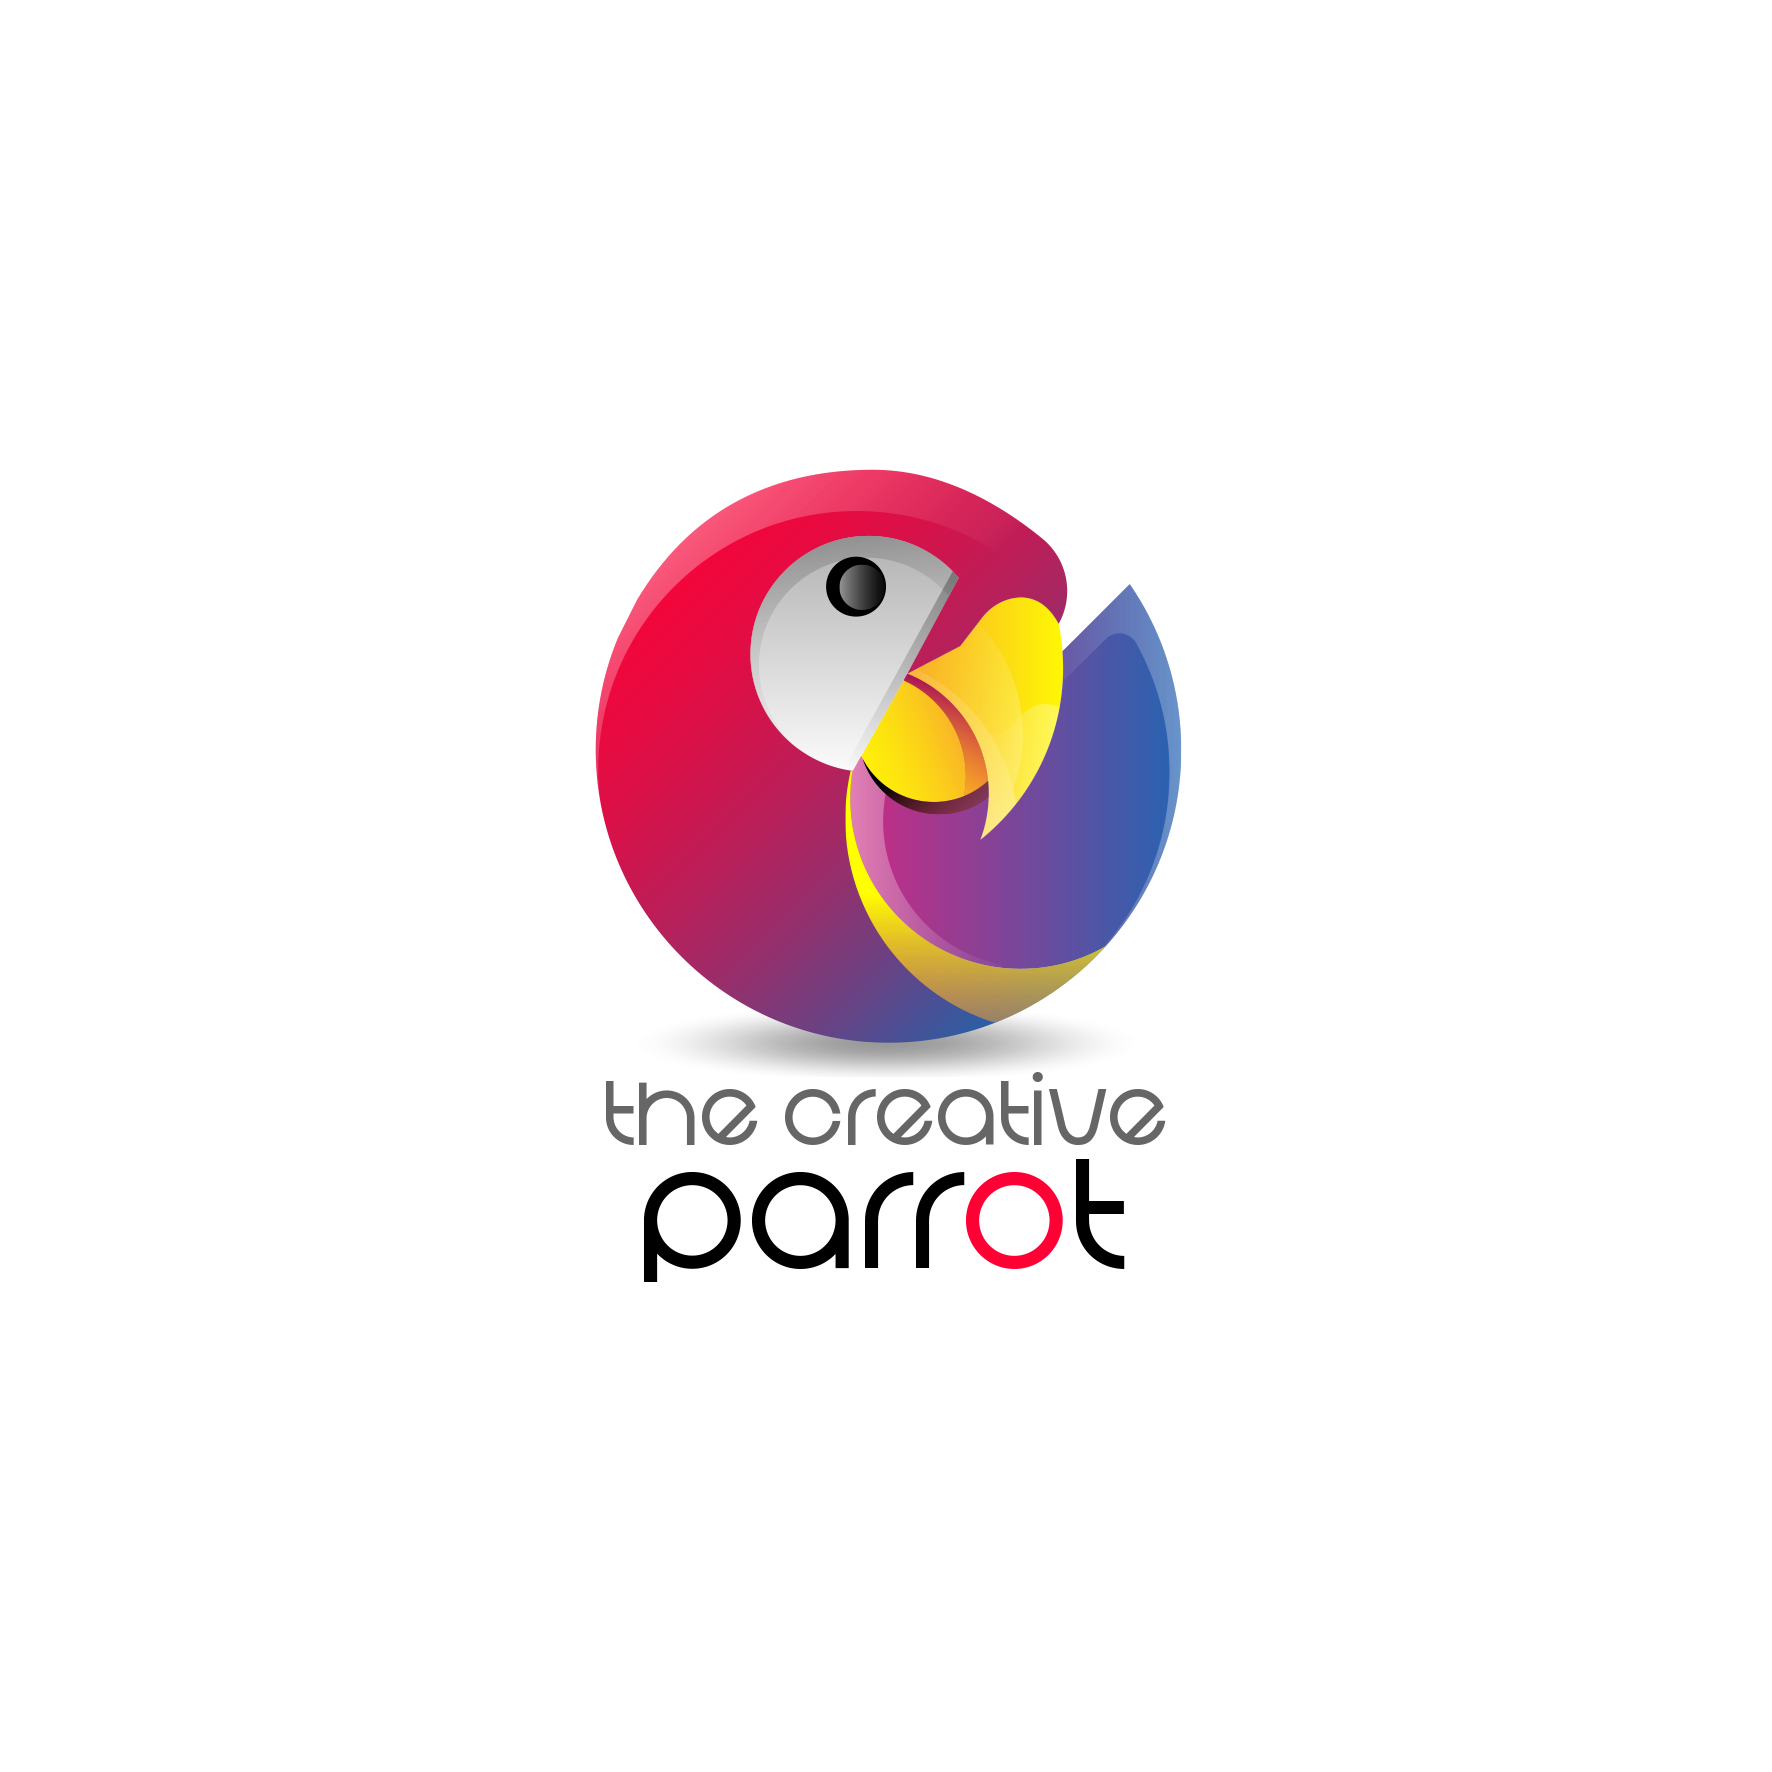 The Creative Parrot